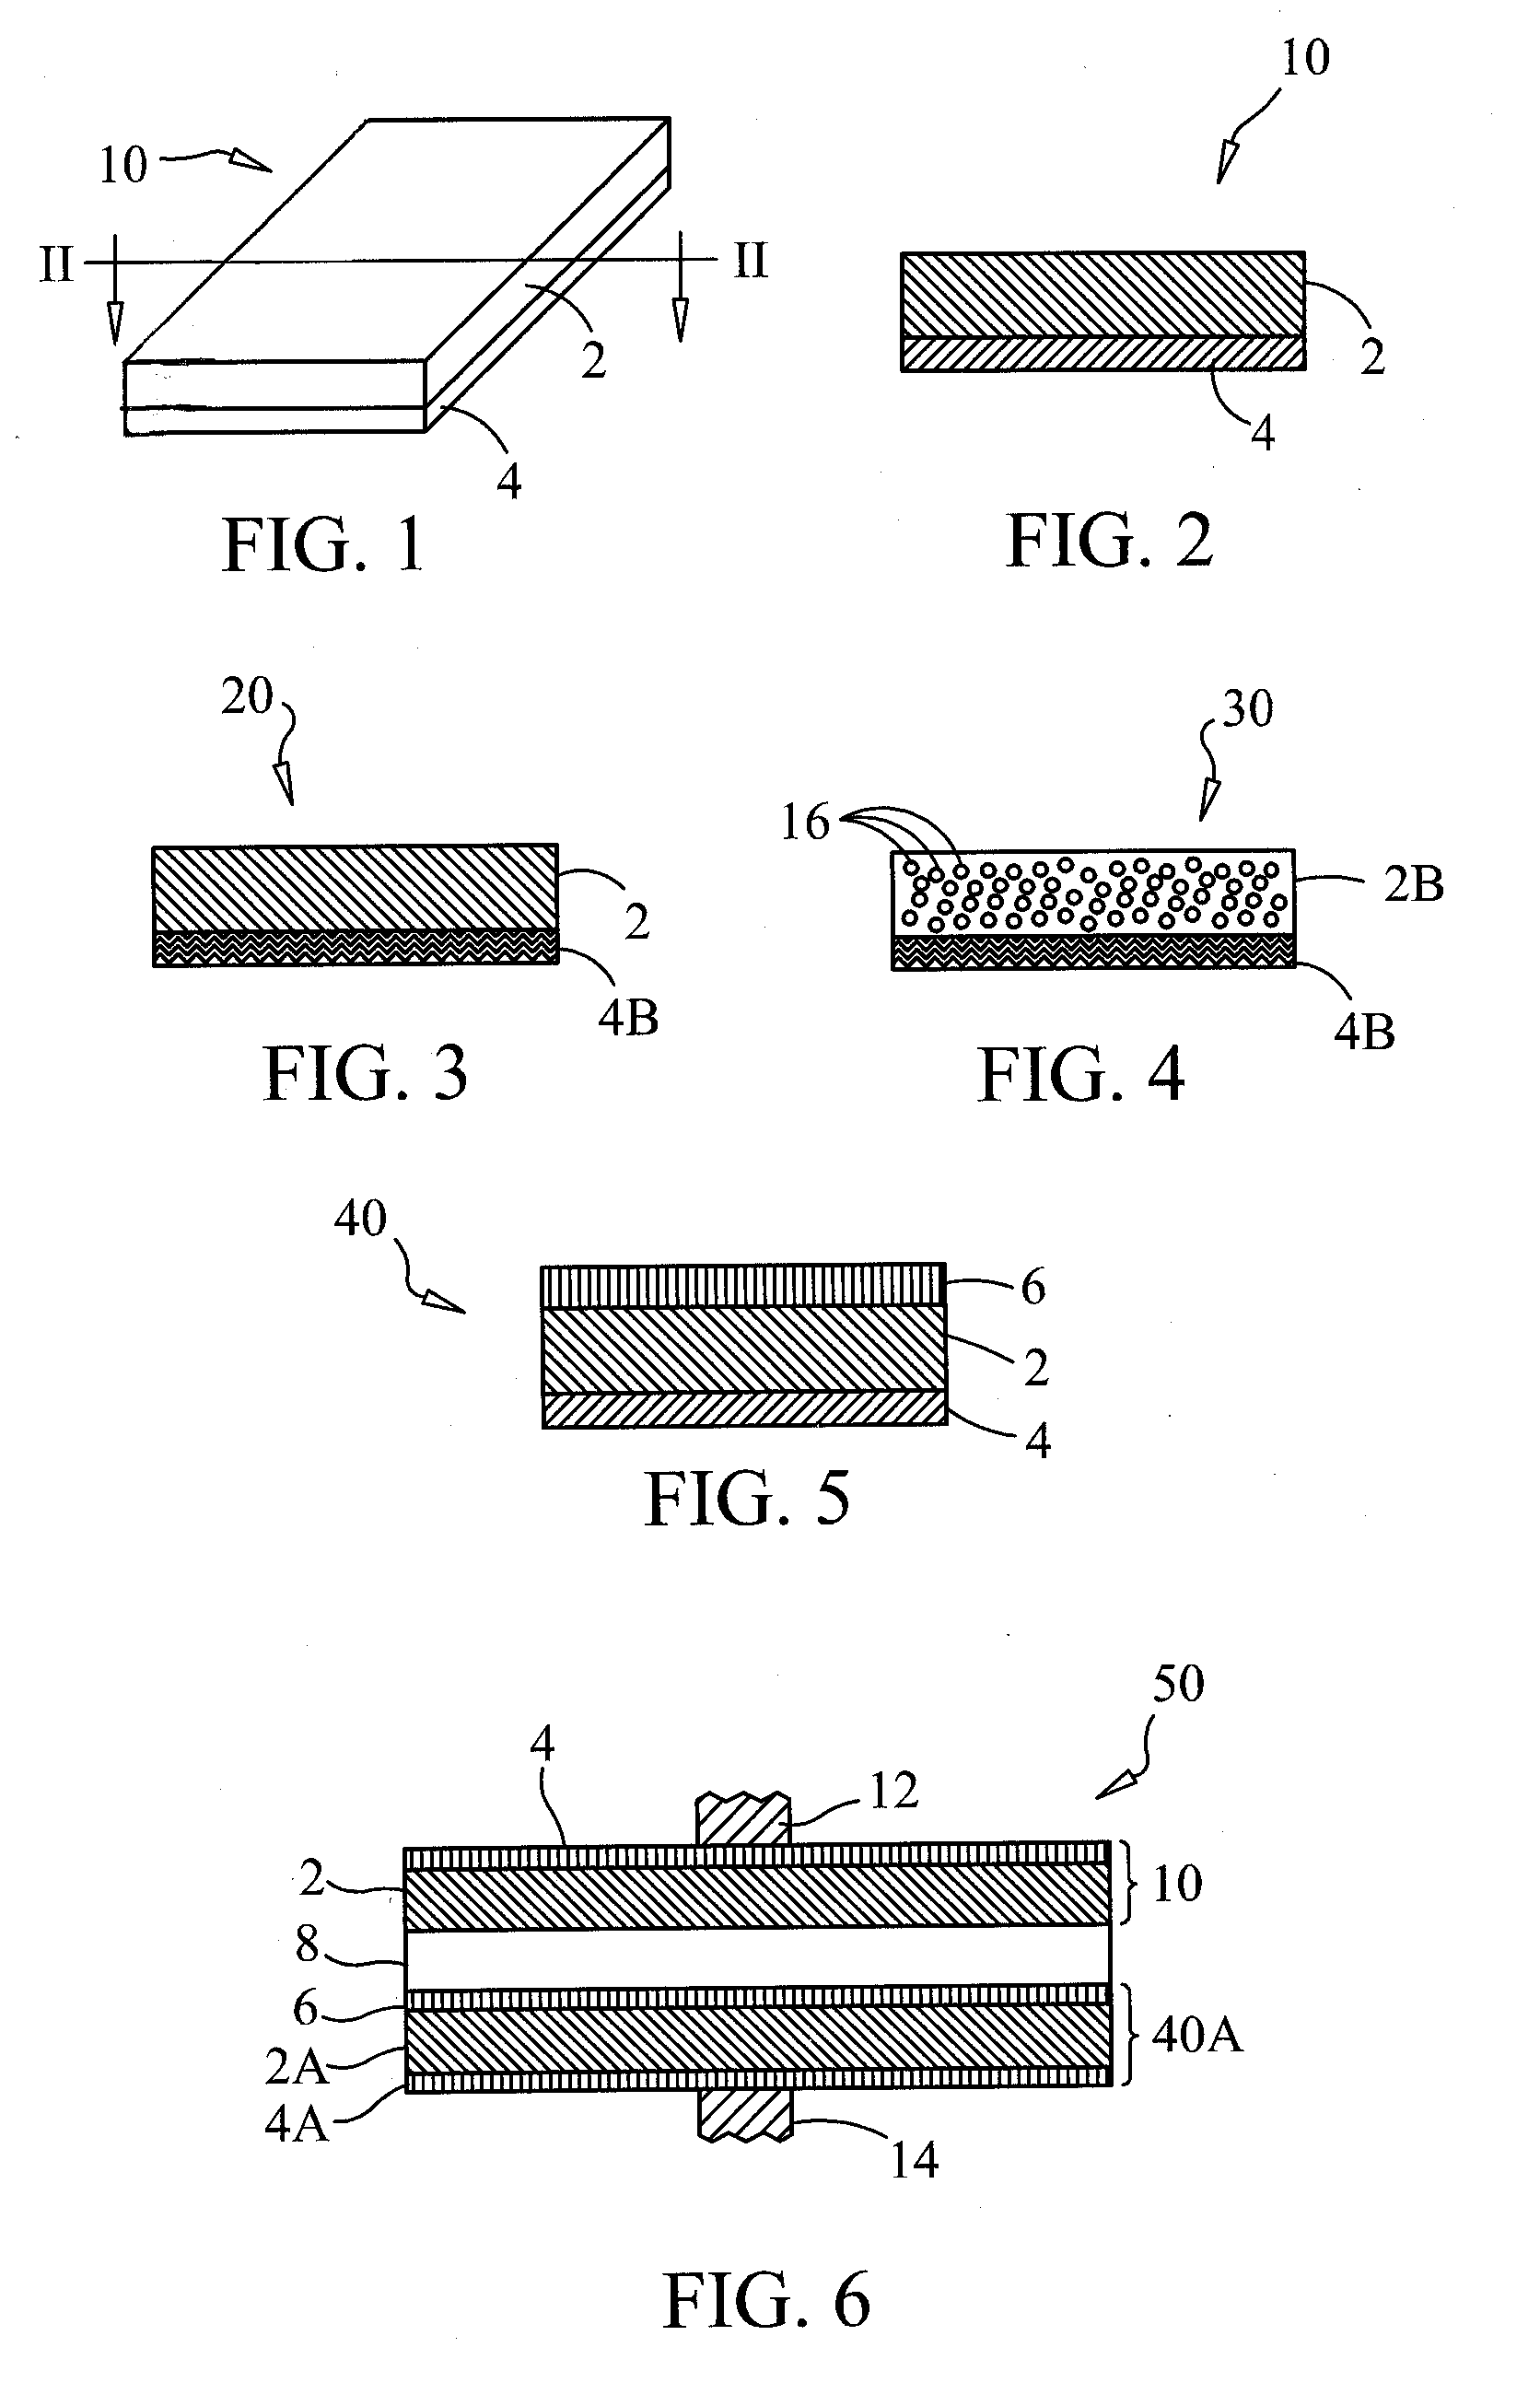 Electro-Blotting Devices, Systems, and Kits, And Methods For Their Use